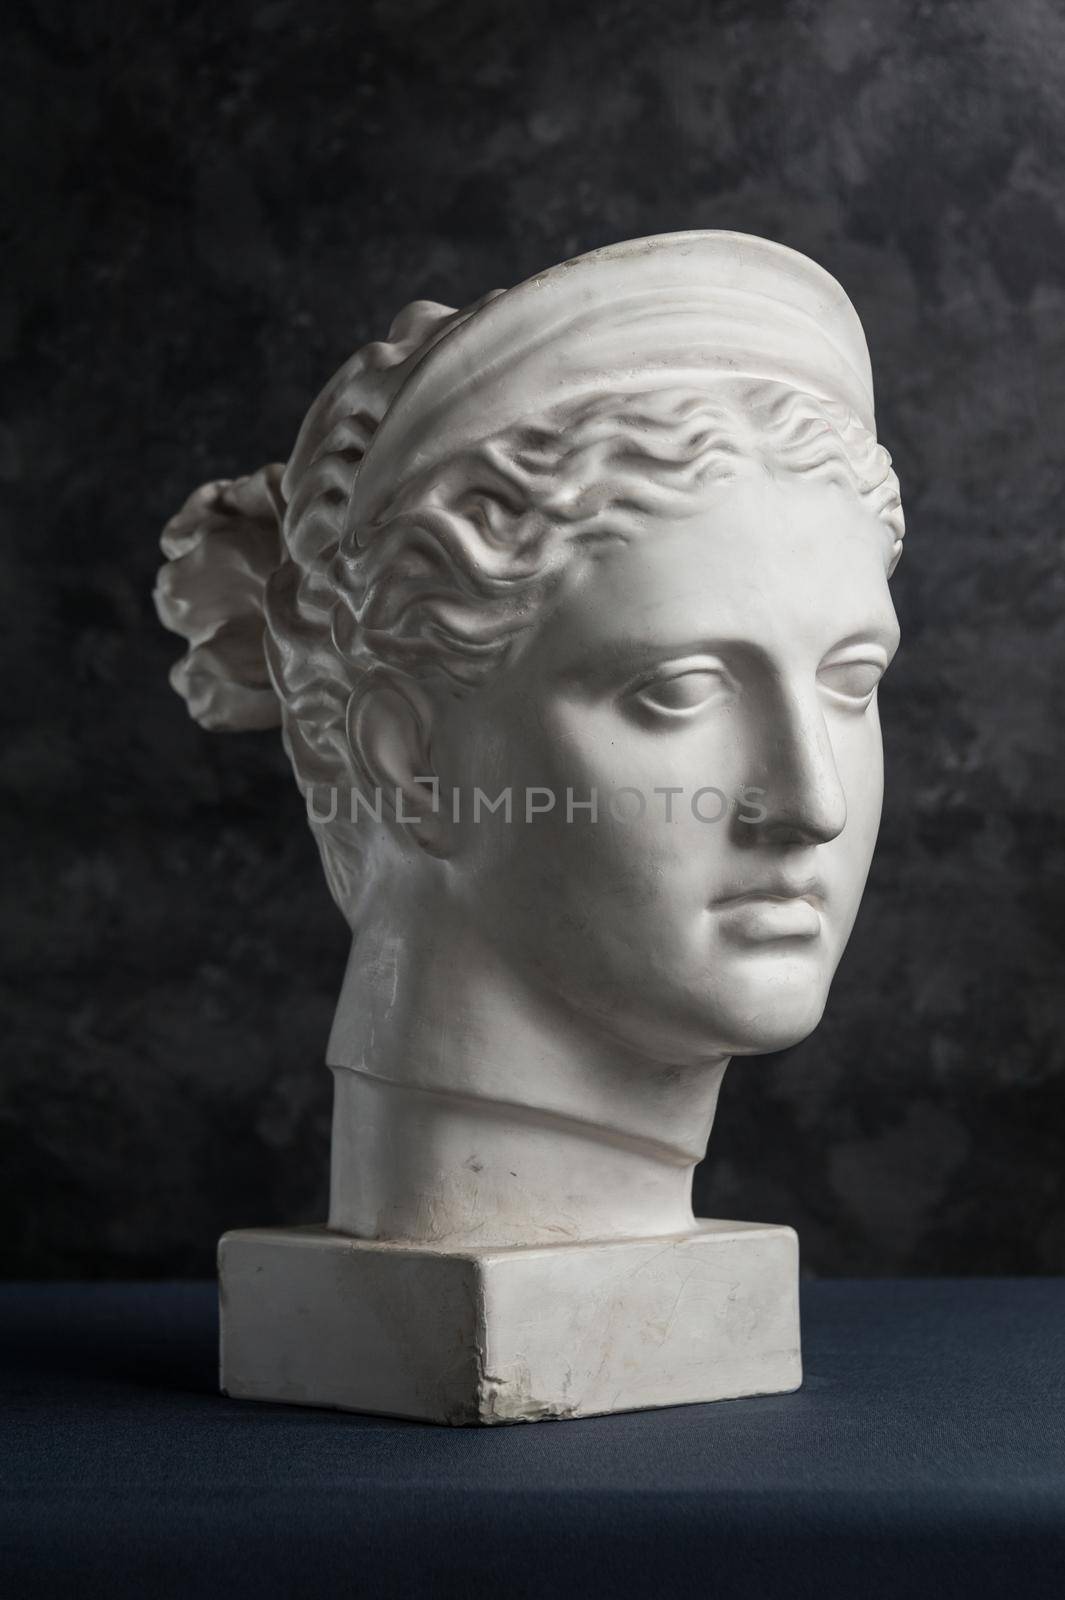 White gypsum copy of ancient statue of Diana head for artists on a dark textured background. Plaster sculpture of woman face. Diana in Roman mythology the goddess of nature and hunting.